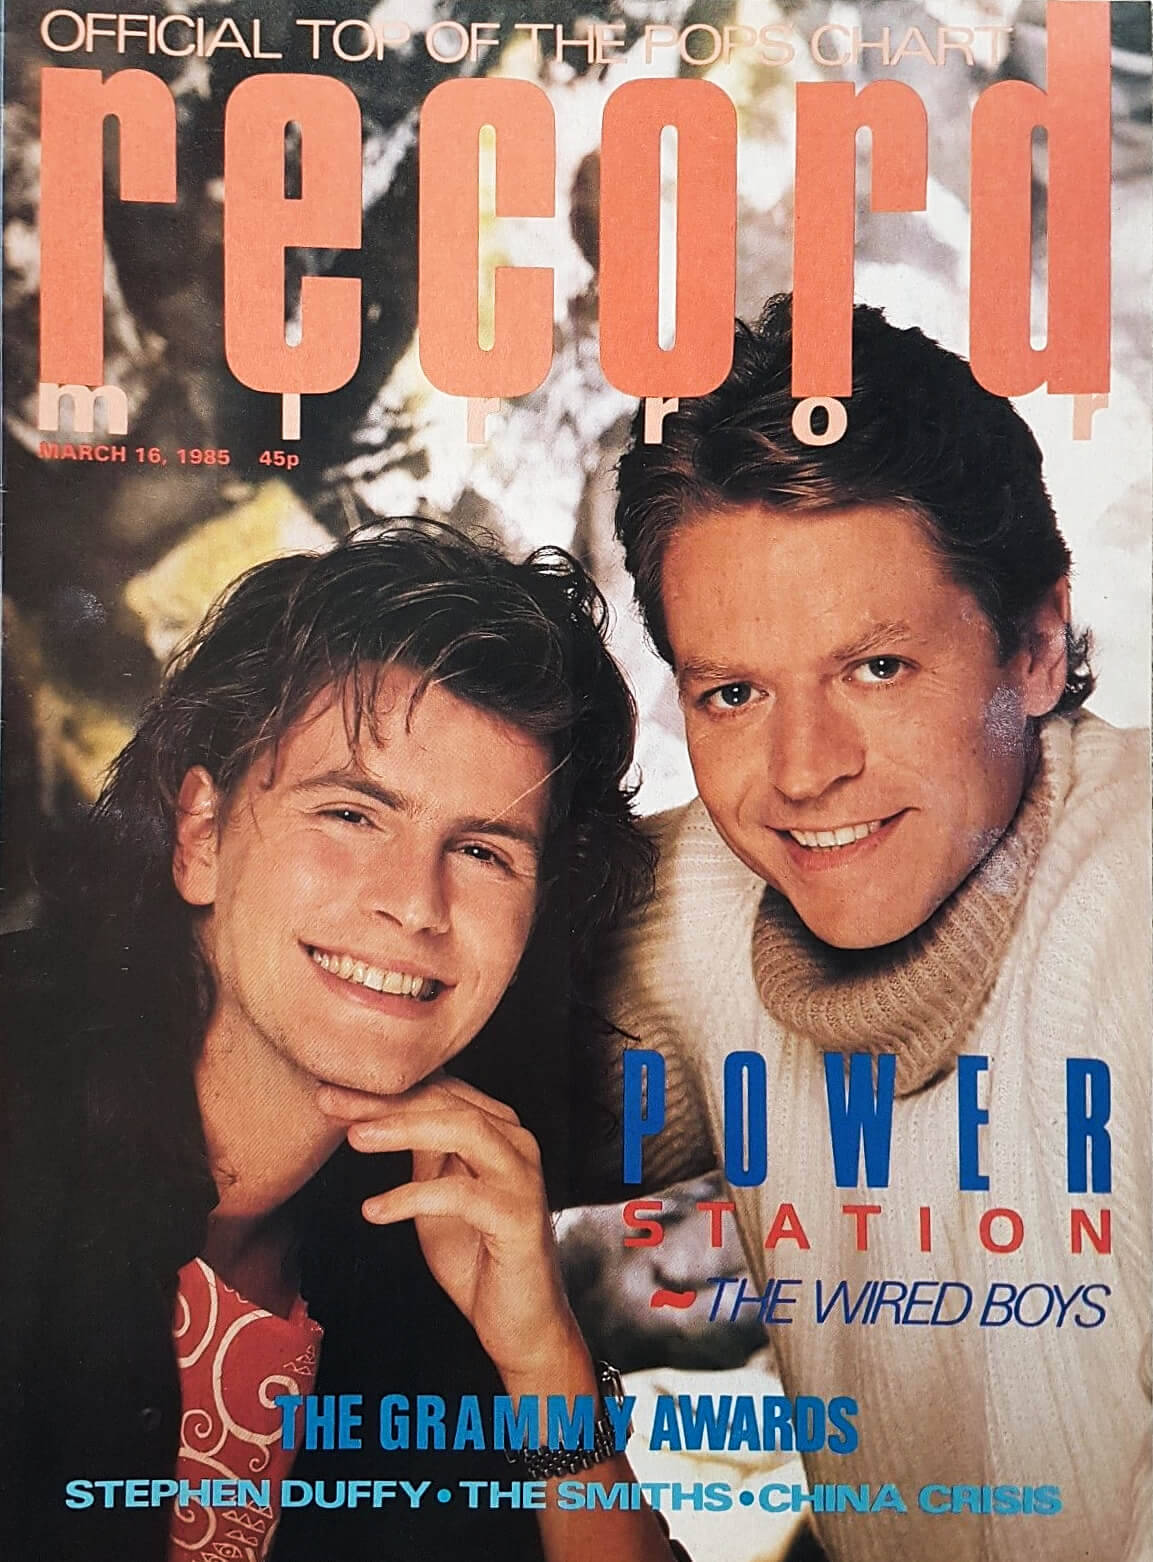 <p>John Taylor and Robert Palmer (The Power Station) on the front cover of Record Mirror magazine, March 1985.</p>